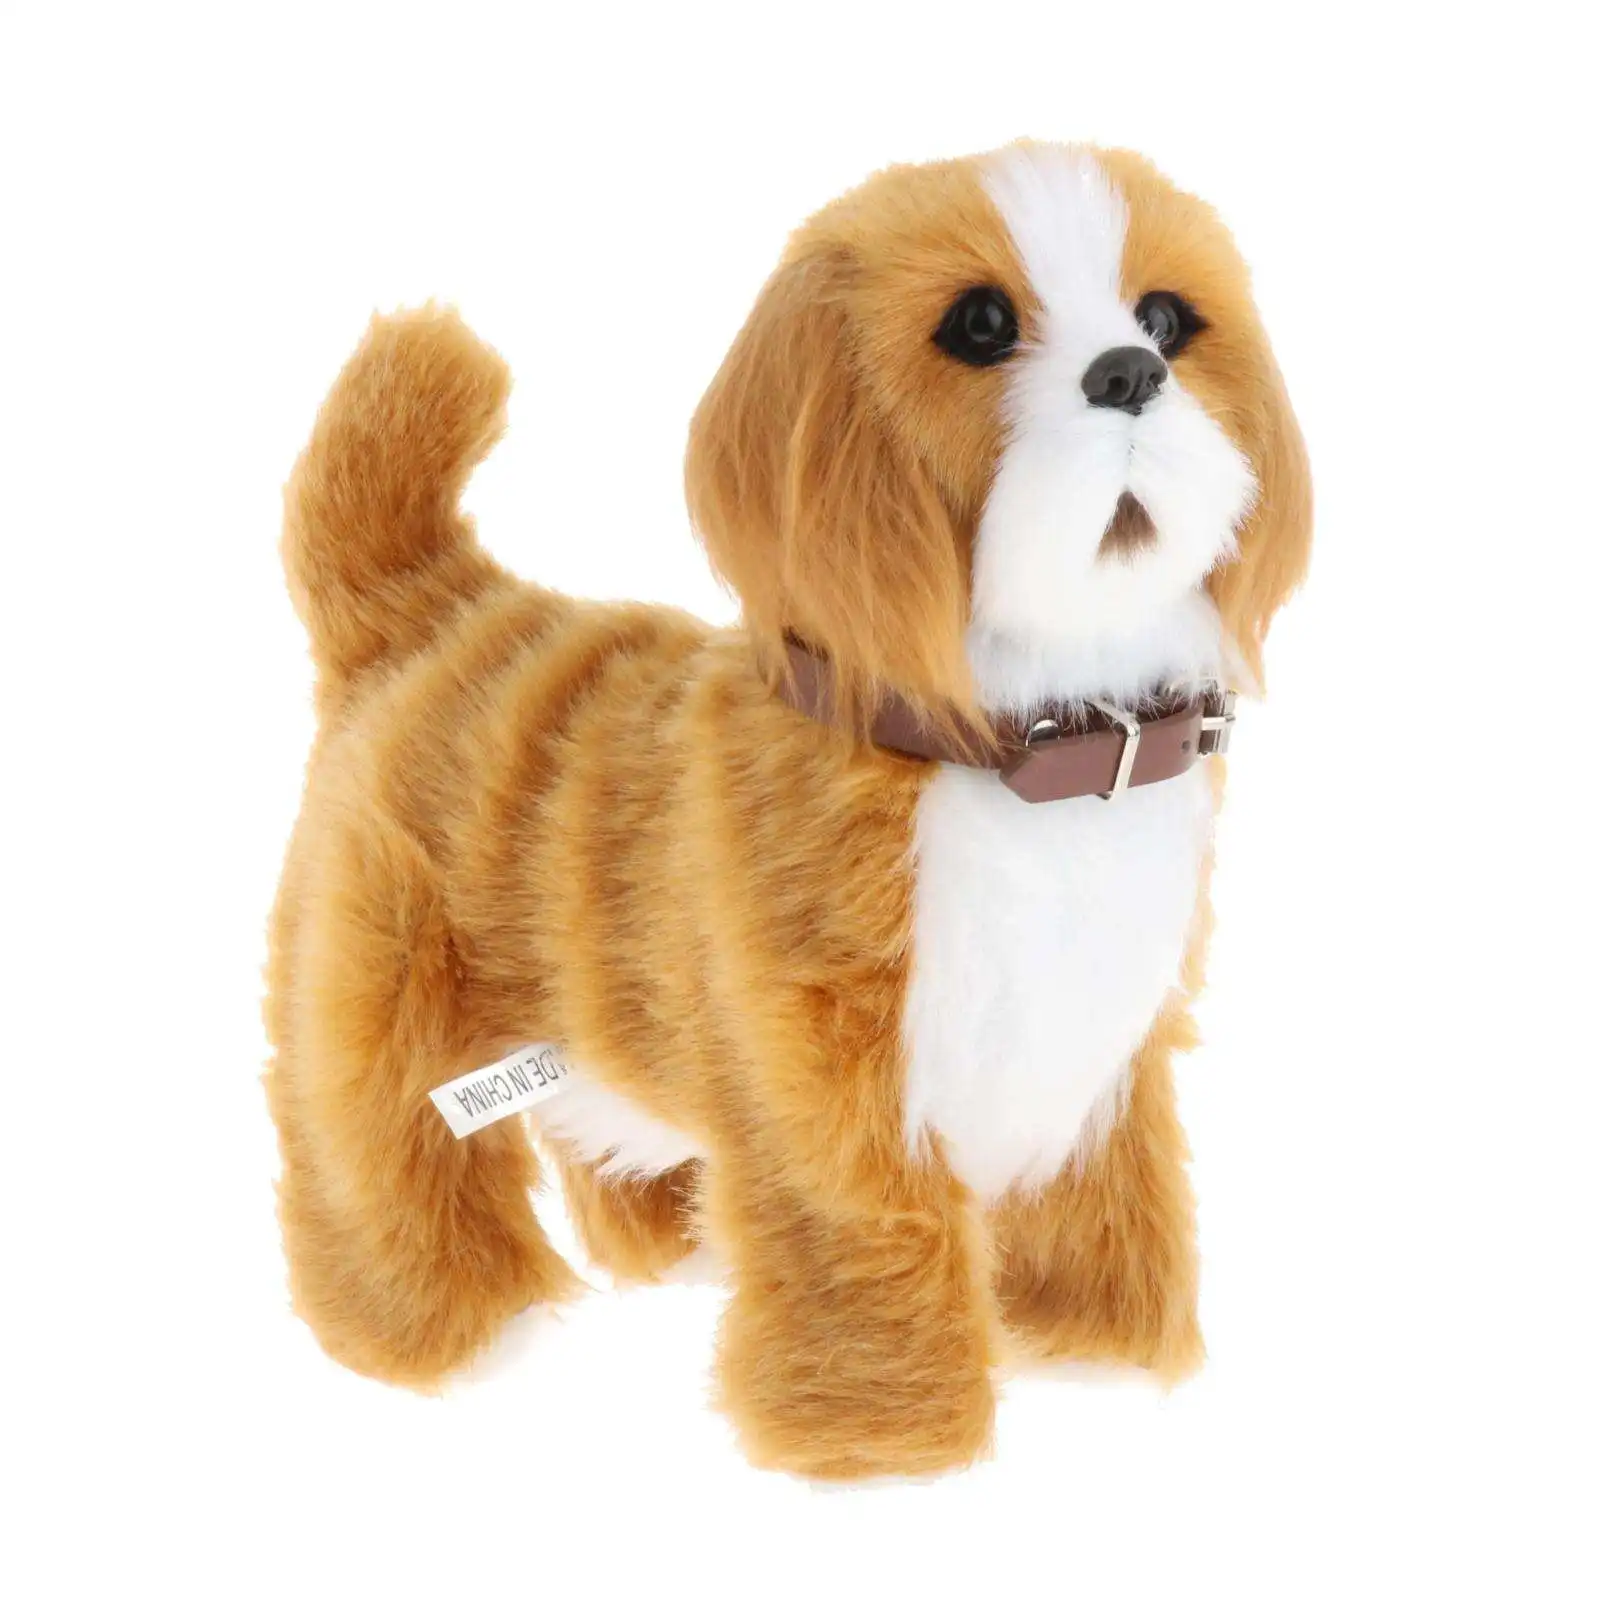 Soft Electronic Pet Interactive Early Learning Battery Operated Puppy Toy Stuffed Animals Doll for Christmas Present Boys Girls